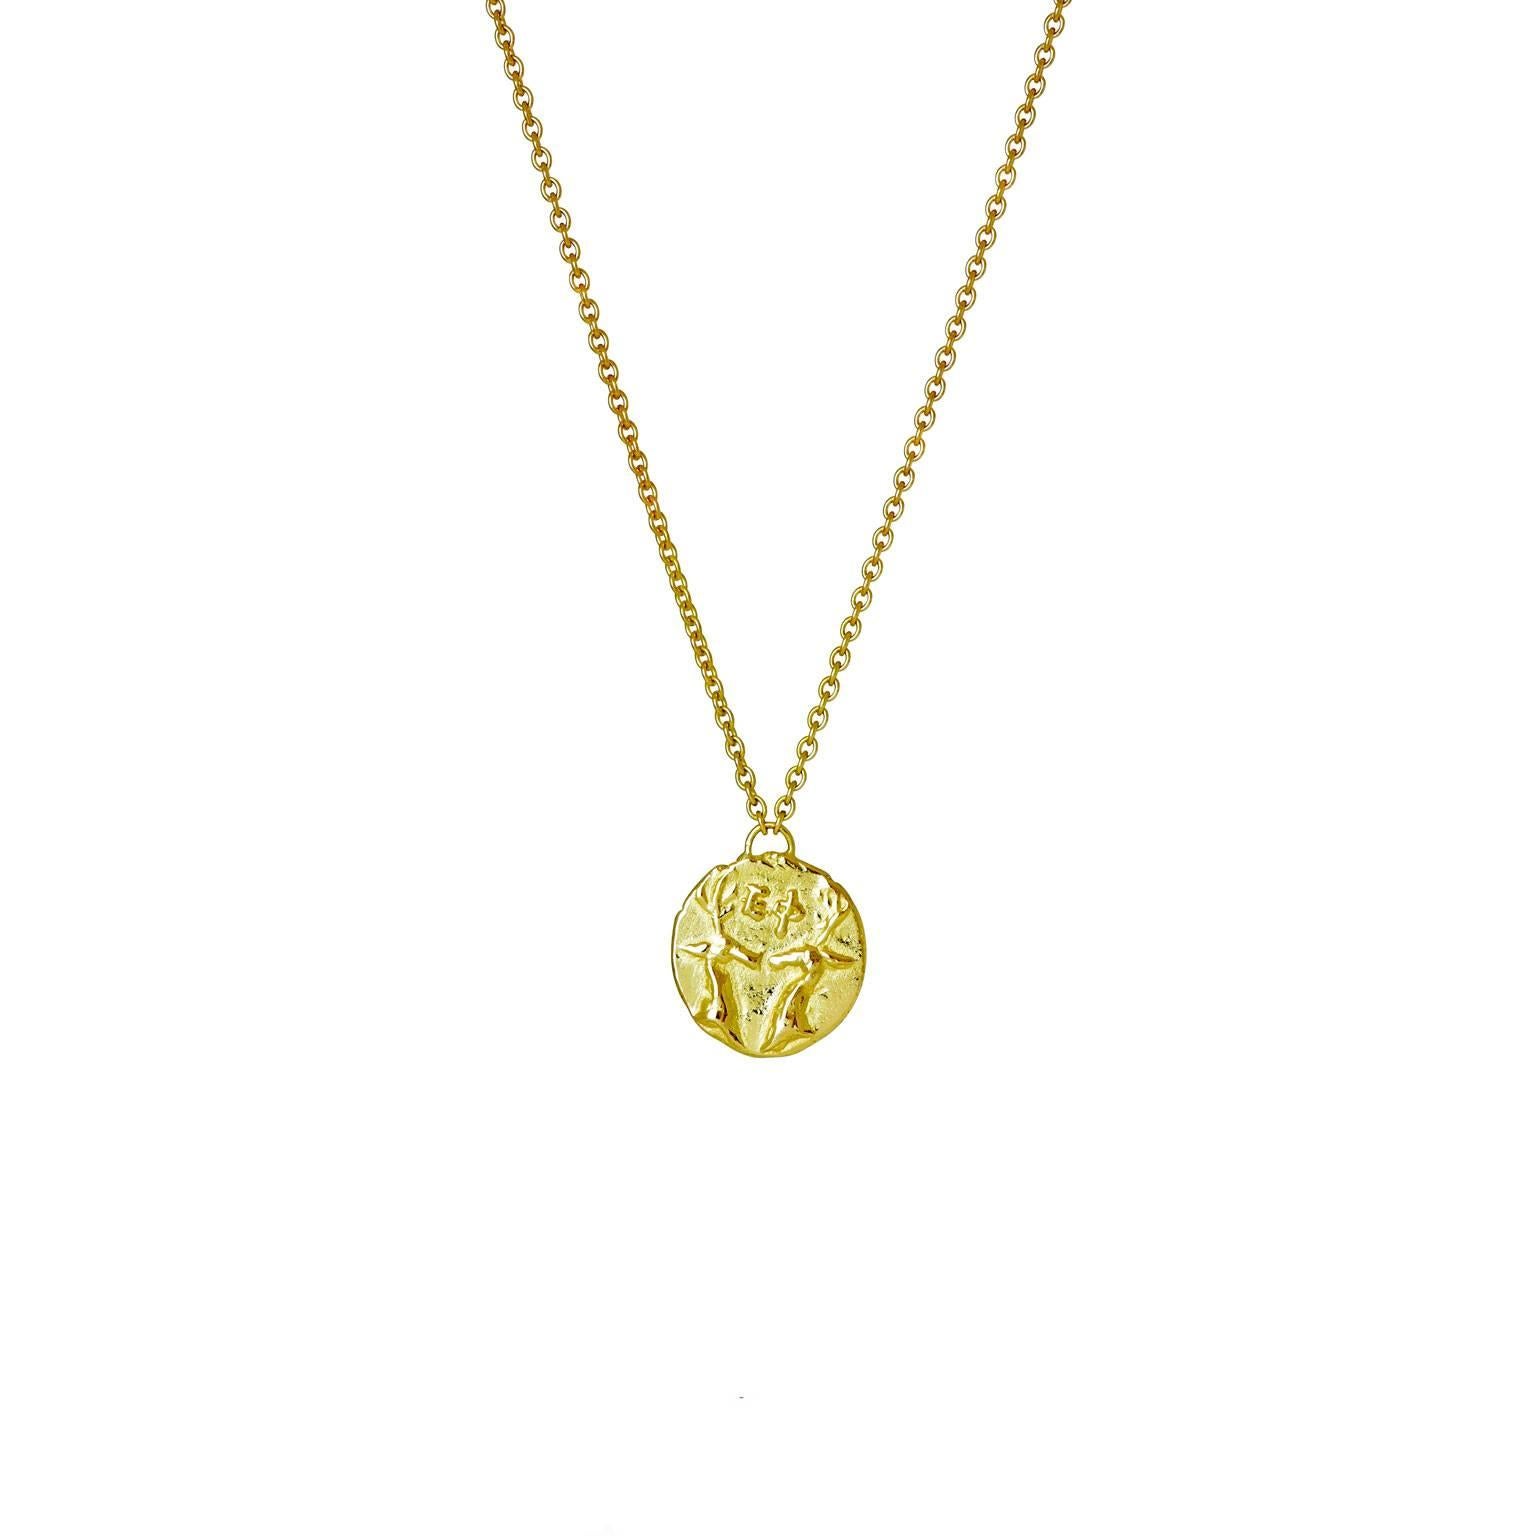 The Melissae necklace features a beautifully detailed bee pendant in yellow gold, which hangs on a fine trace chain. On the reverse side are two stag's heads facing one another. Both are symbols of Artemis the Greek goddess of hunting and the